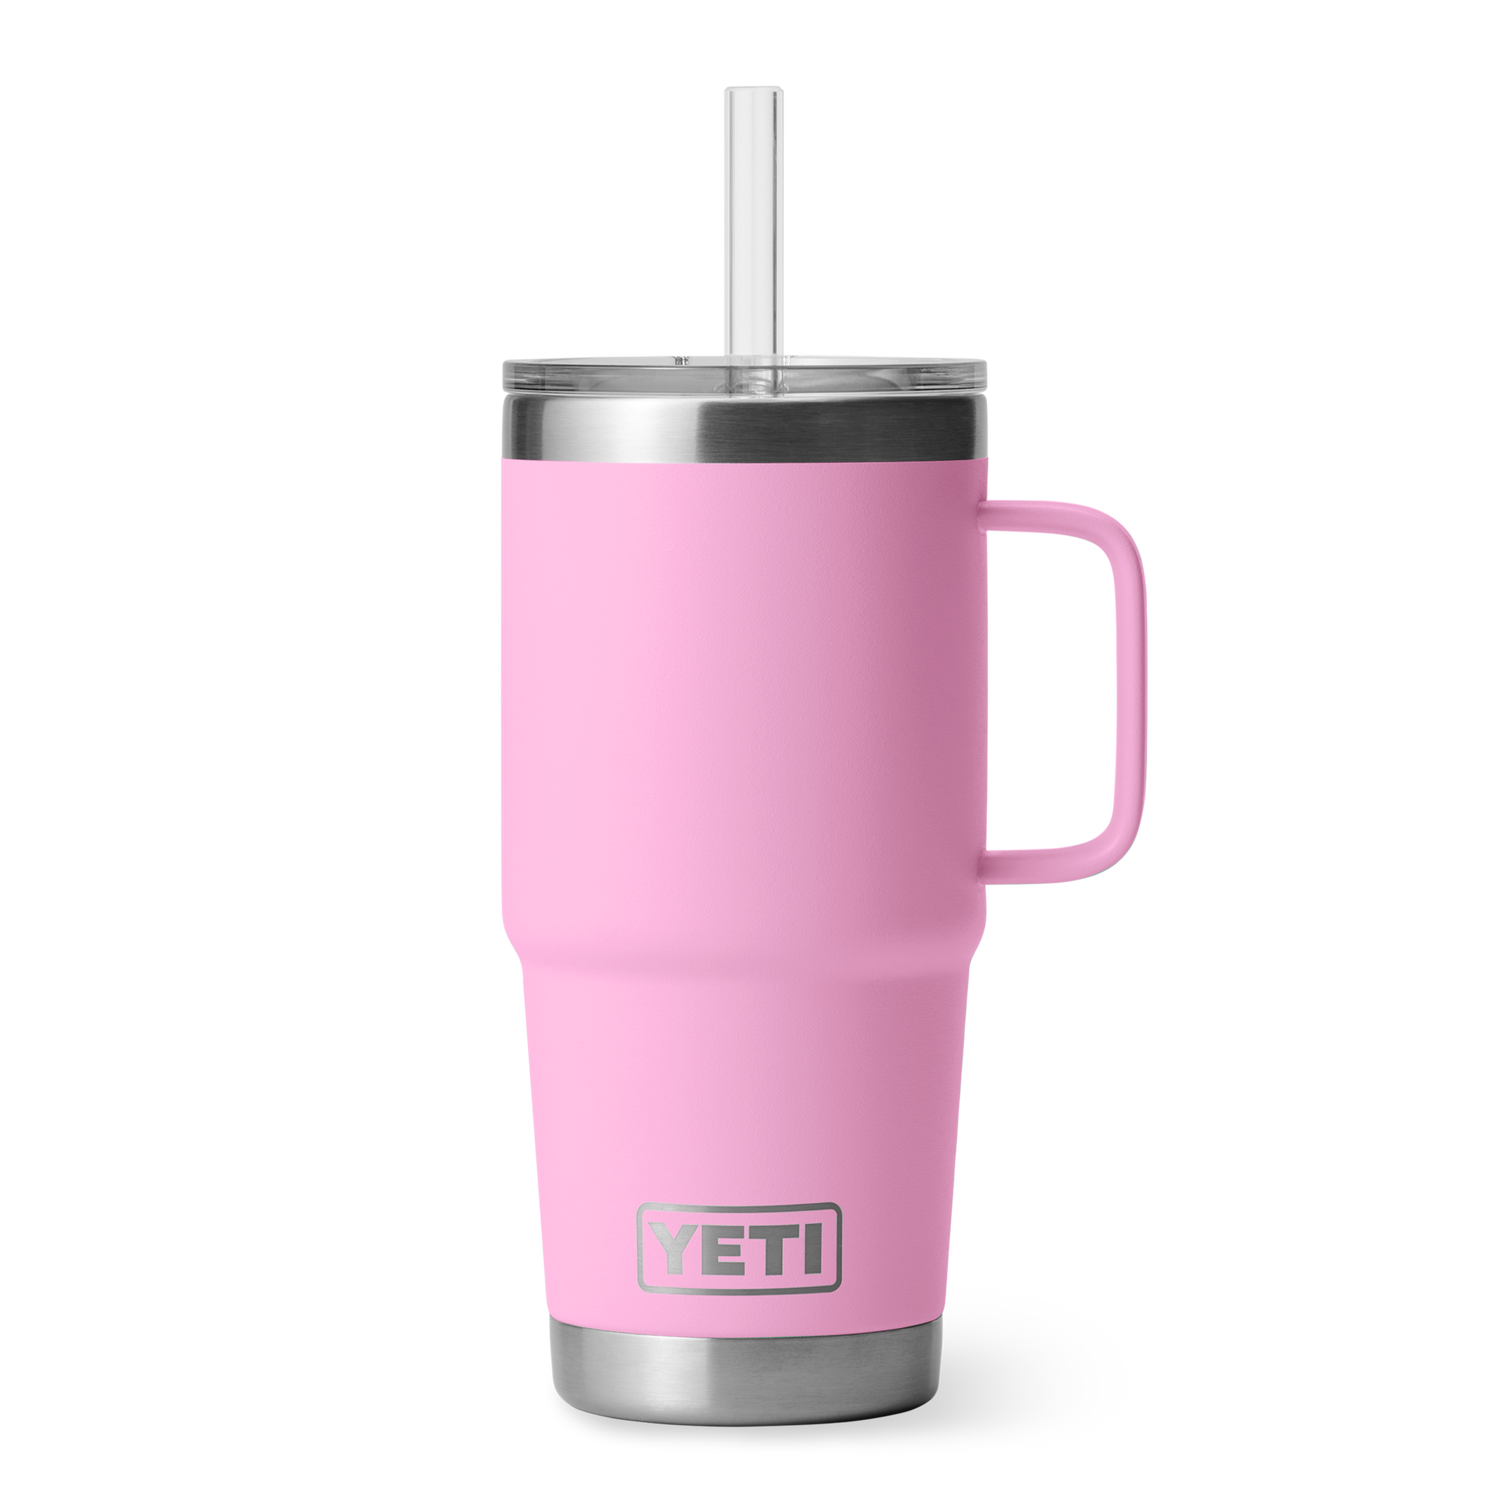 Yeti Rambler 20 oz Replacement Lid with Straw